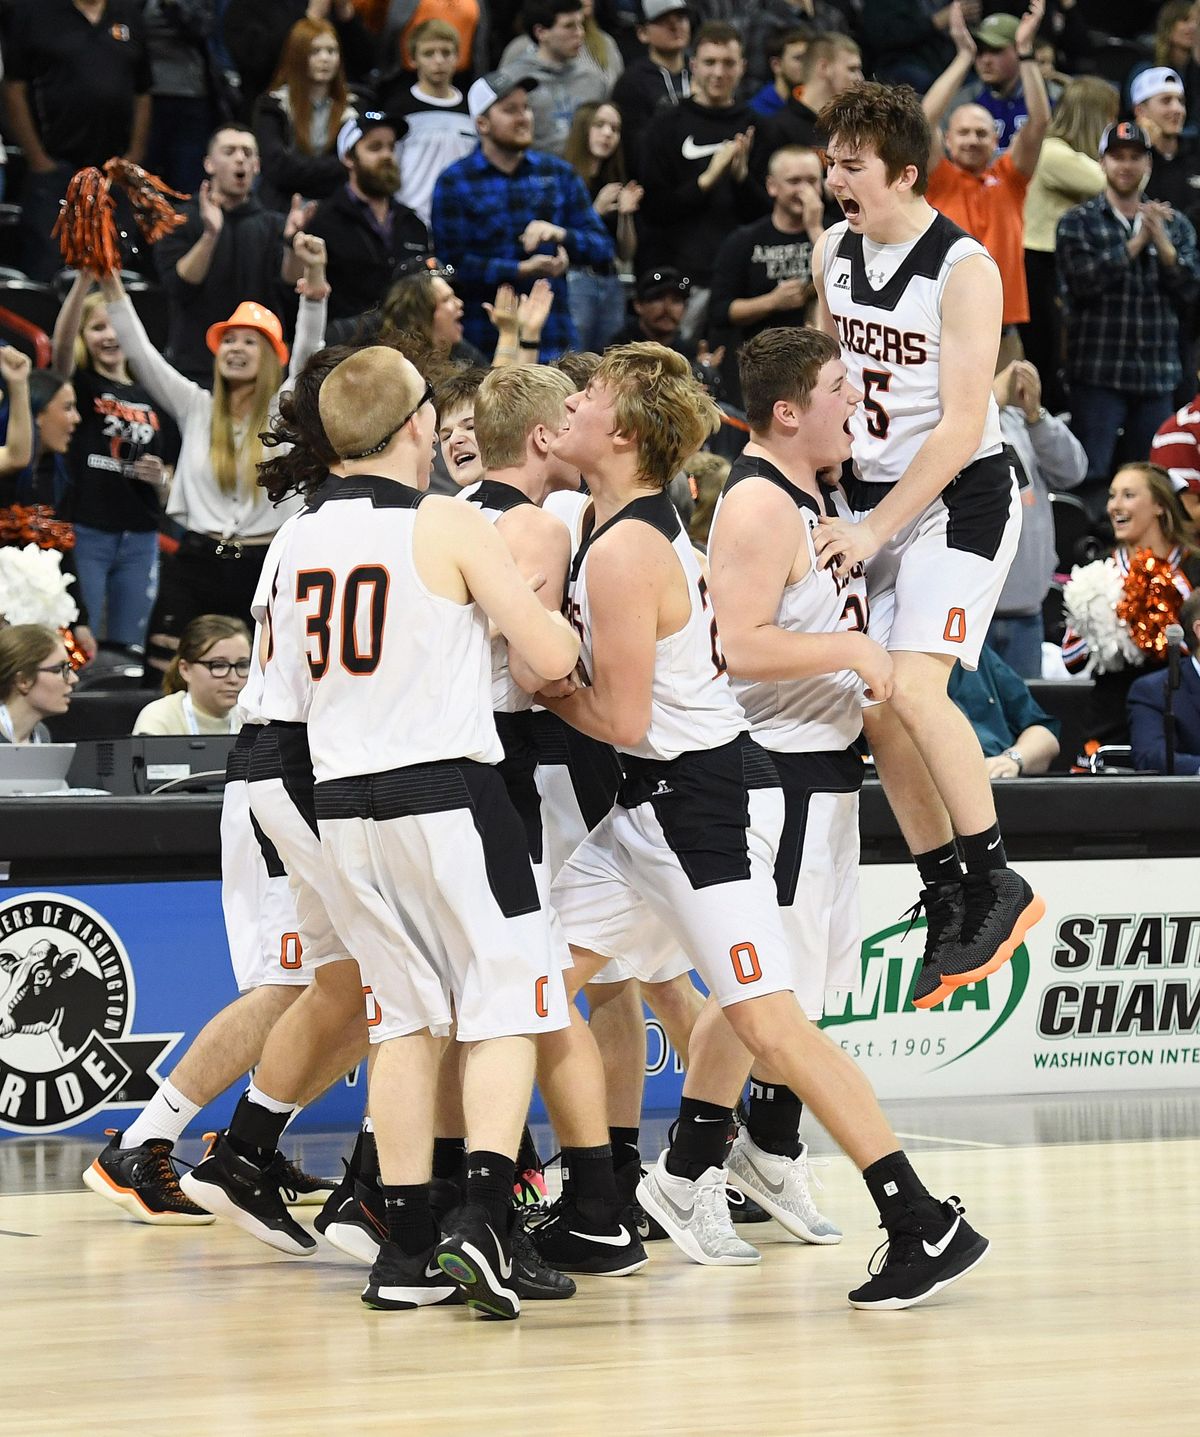 Odessa celebrates their 62-56 win over the Naselle Comets during a State 1B boys semifinal game on Friday, March 6, 2020, at the Spokane Arena. (Colin Mulvany / The Spokesman-Review)